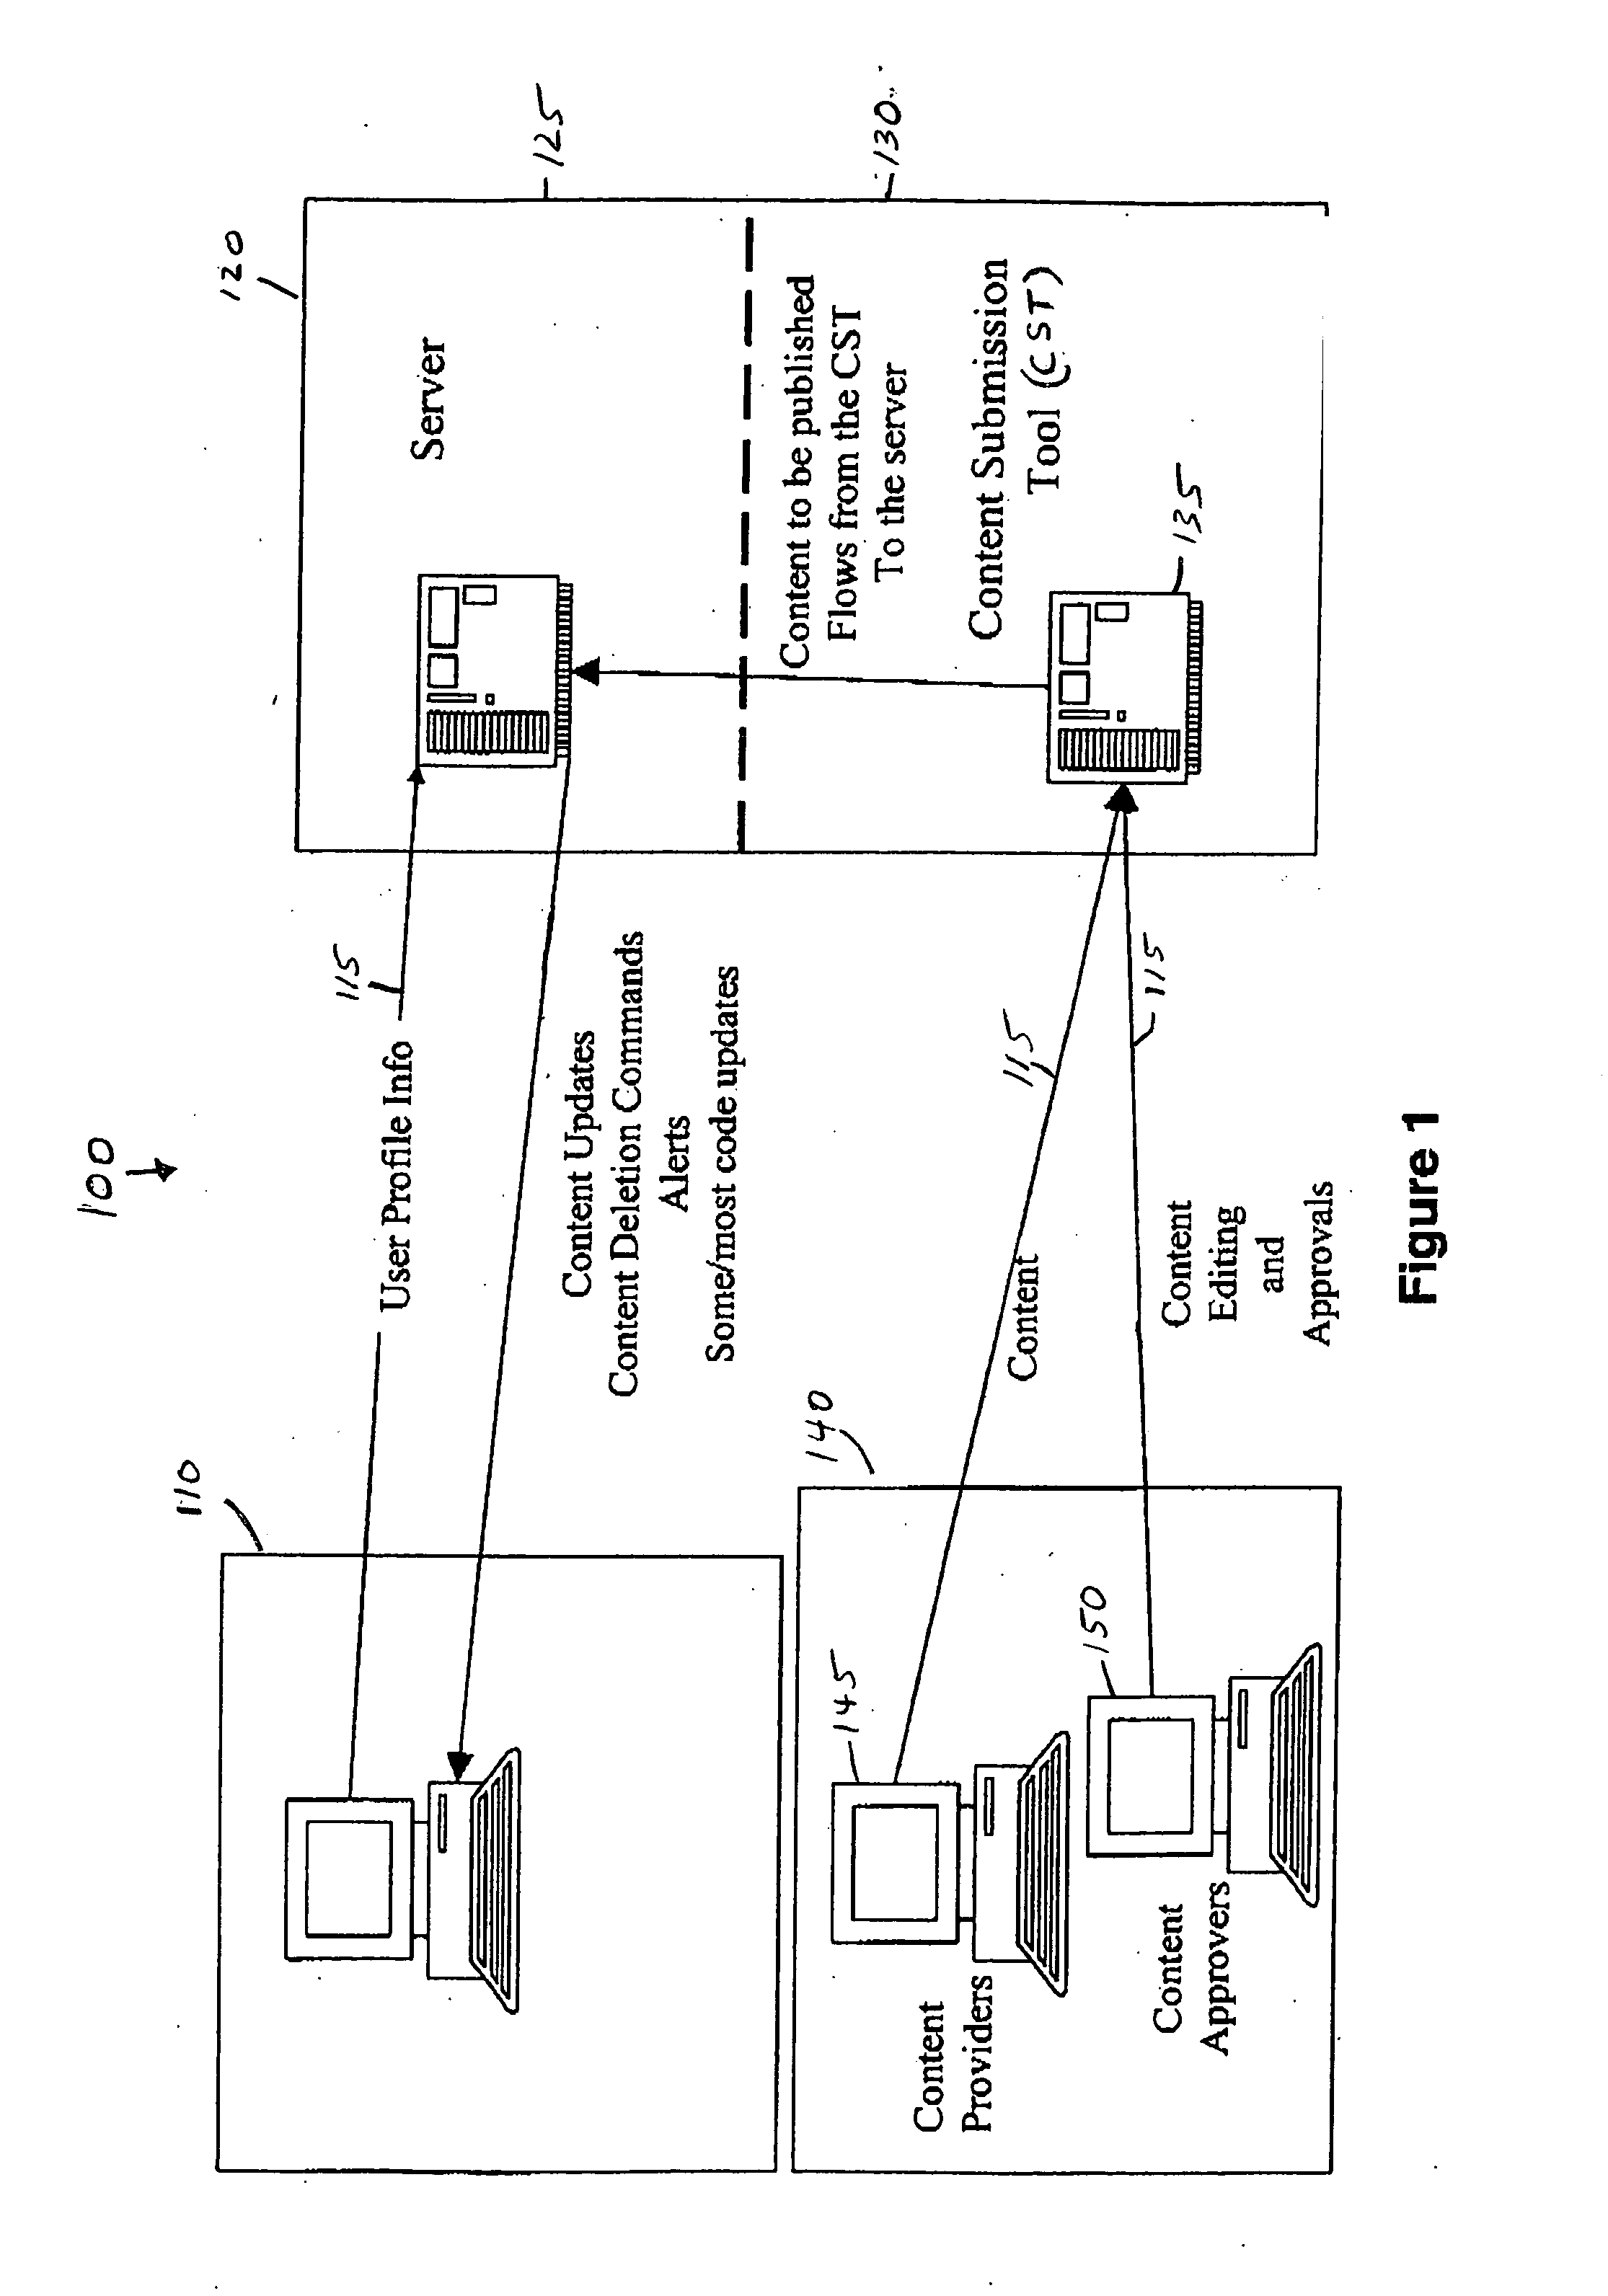 Method and system for matching appropriate content with users by matching content tags and profiles